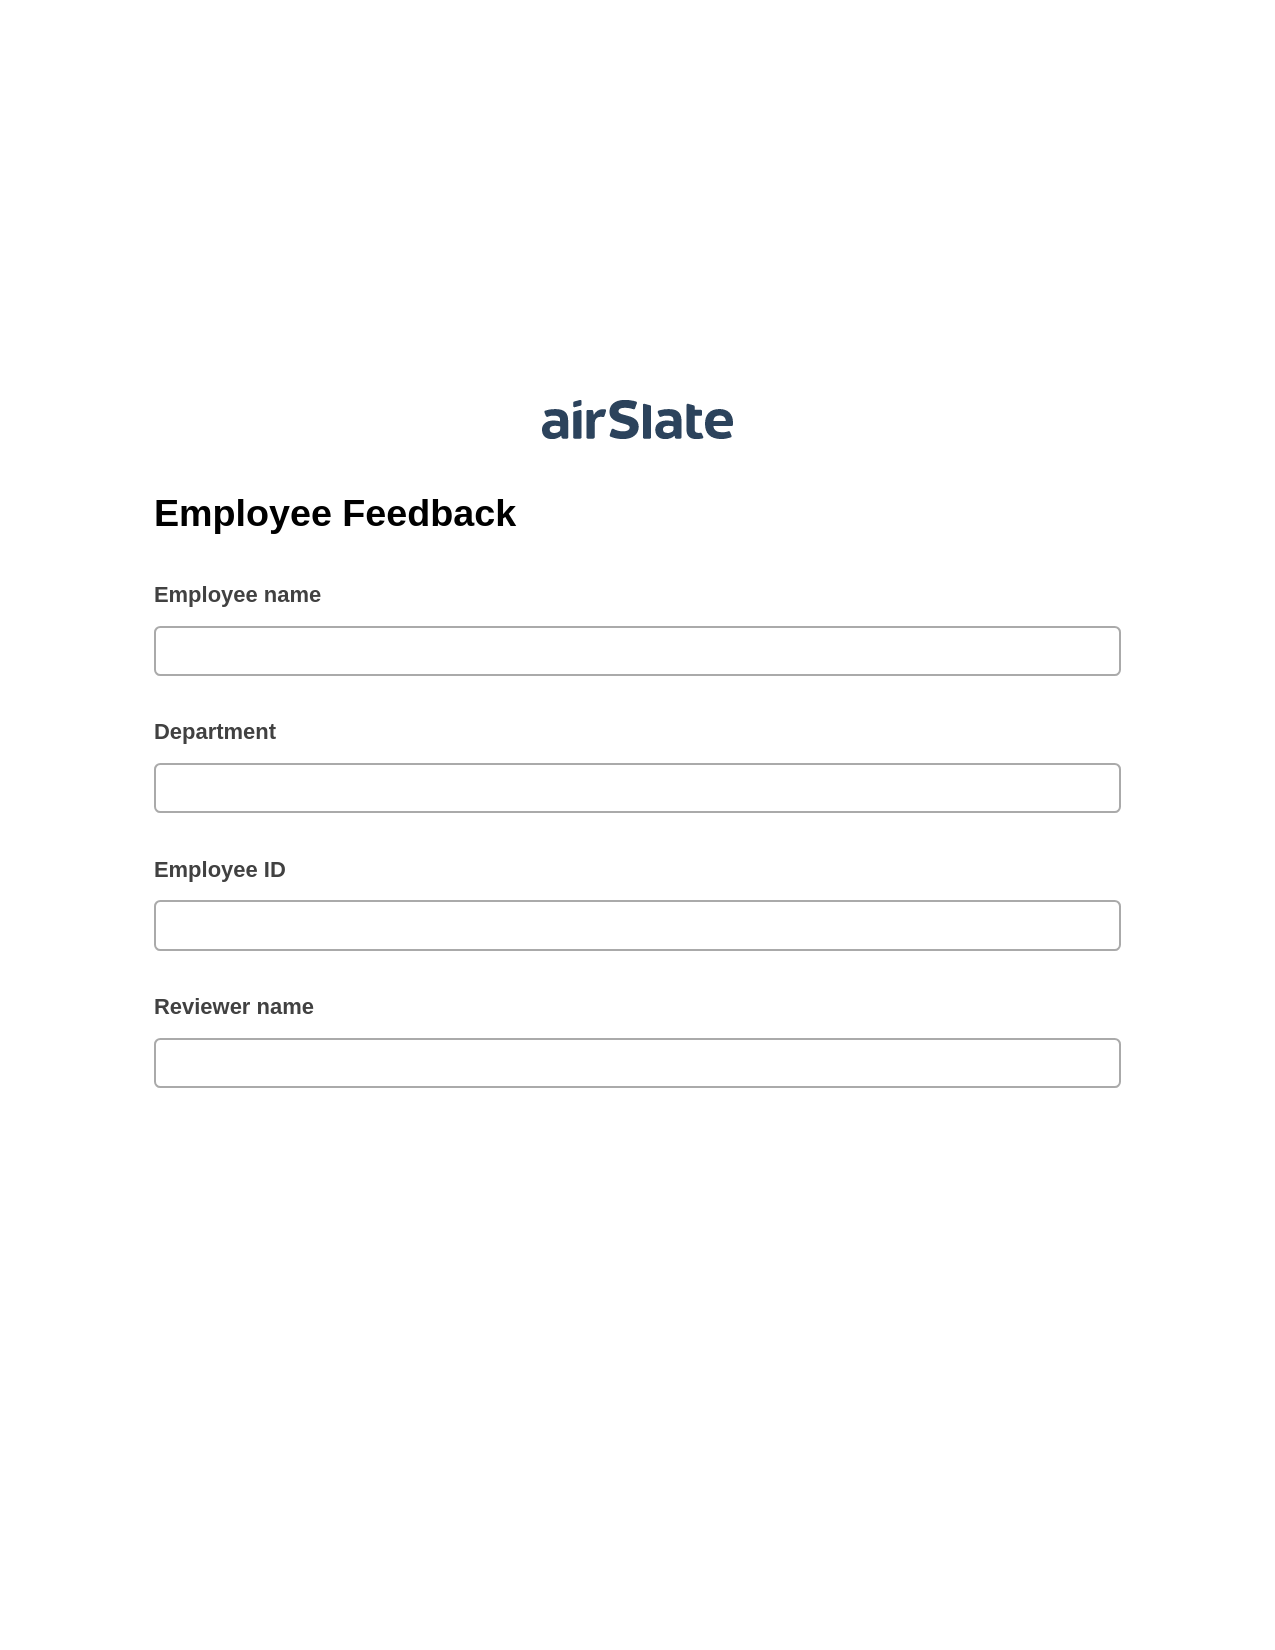 Employee Feedback Pre-fill Slate from MS Dynamics 365 Records Bot, Document Hide Bot, Google Drive Bot